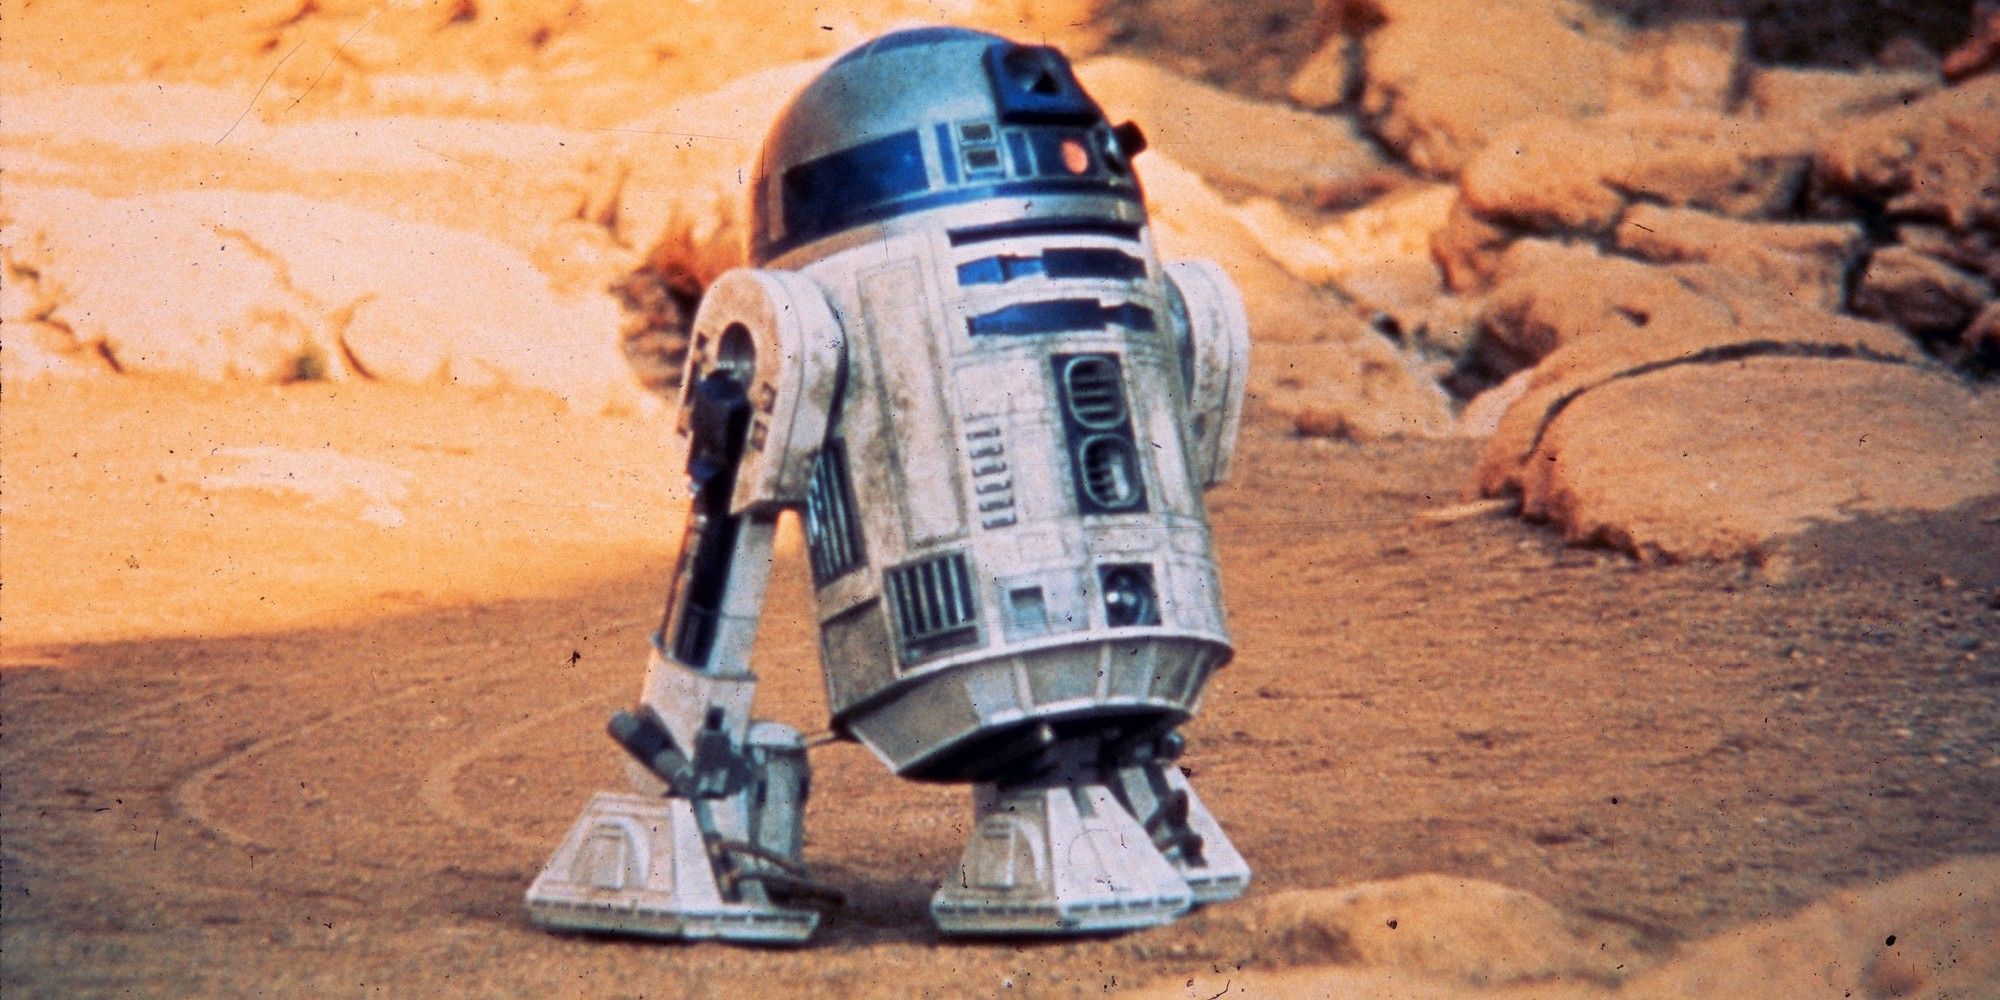 R2-D2 rolls through Tatooine alone in Star Wars A New Hope